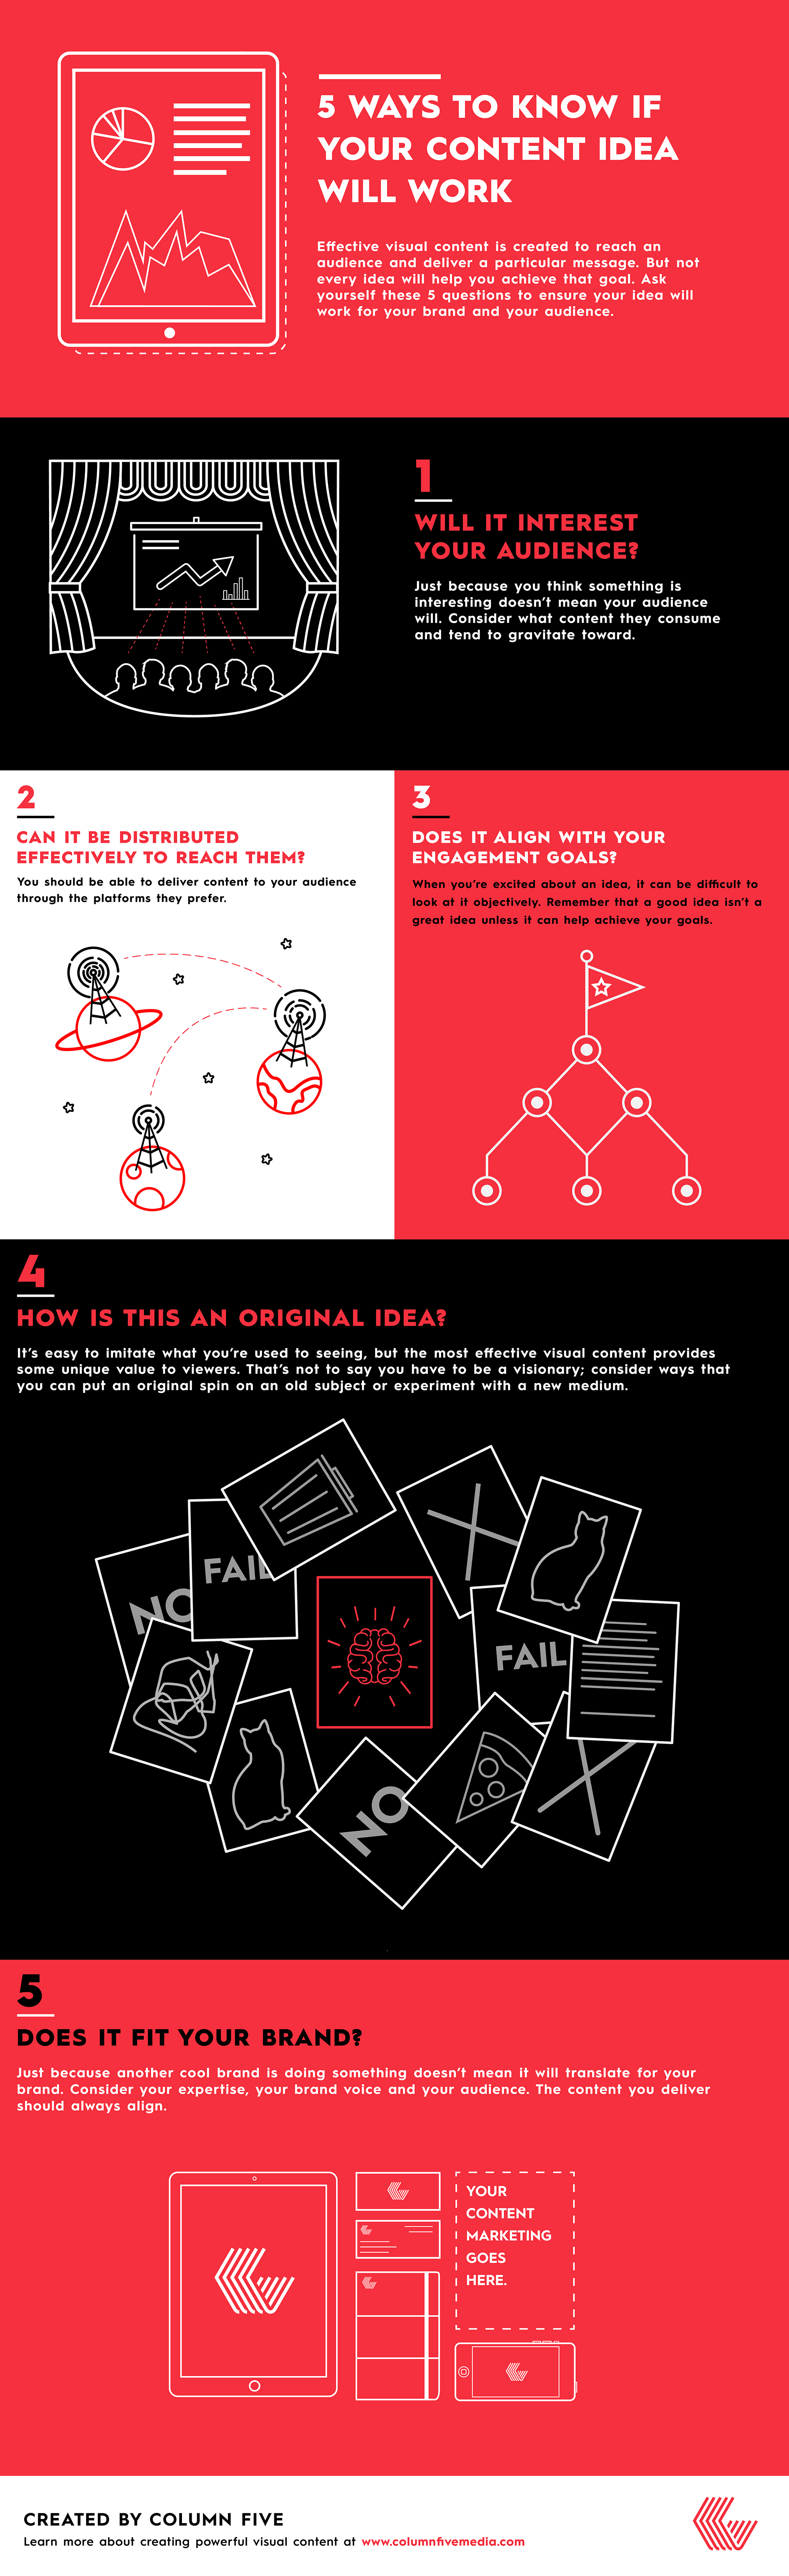 content marketing ideas infographic